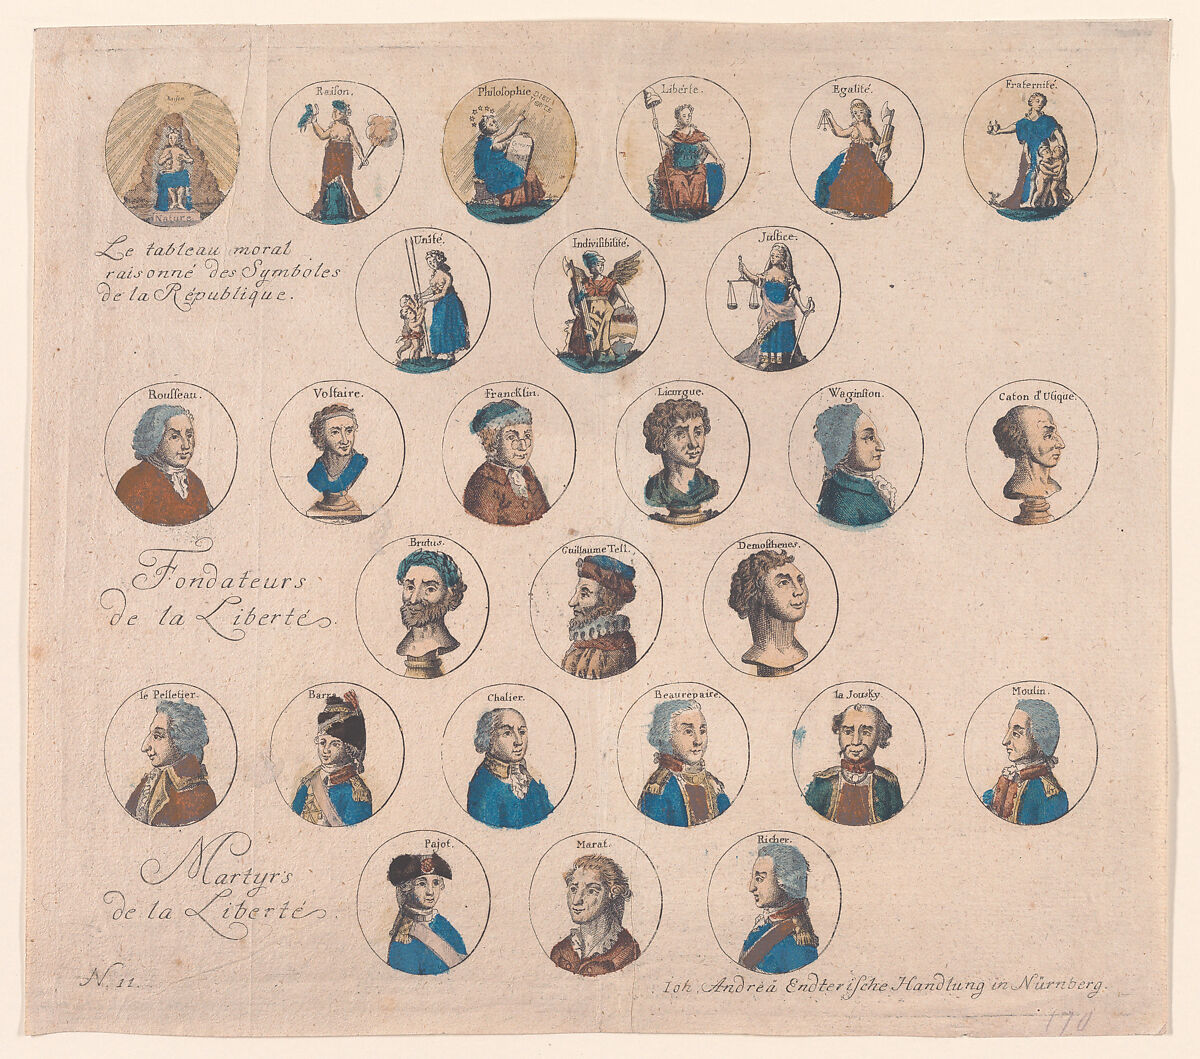 The Reasoned Moral Chart of Symbols of the Republic, Founders of Liberty, and Martyrs of Liberty, Johann Andreas Endterische Handlung  German, Hand-colored etching